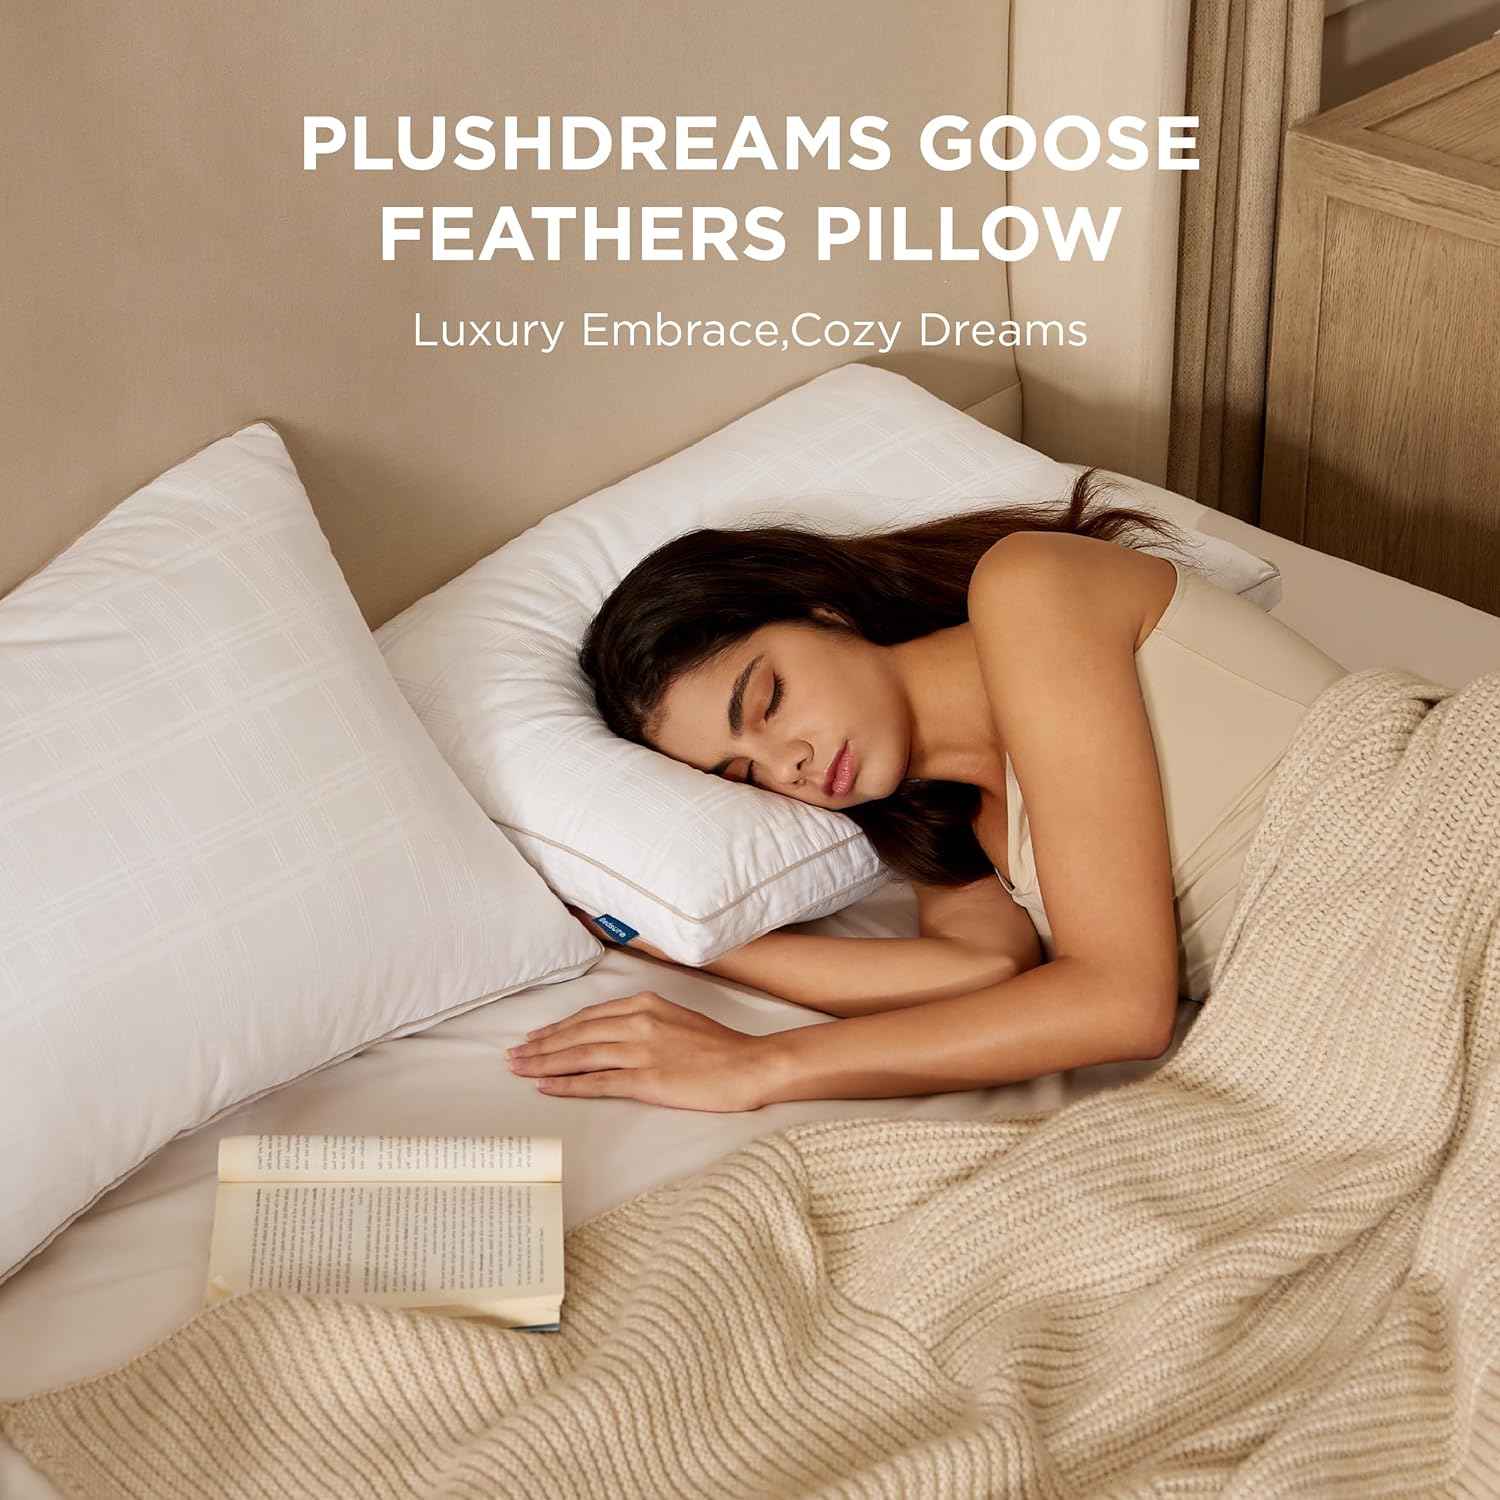 PushDreams Goose Feathers Pillow